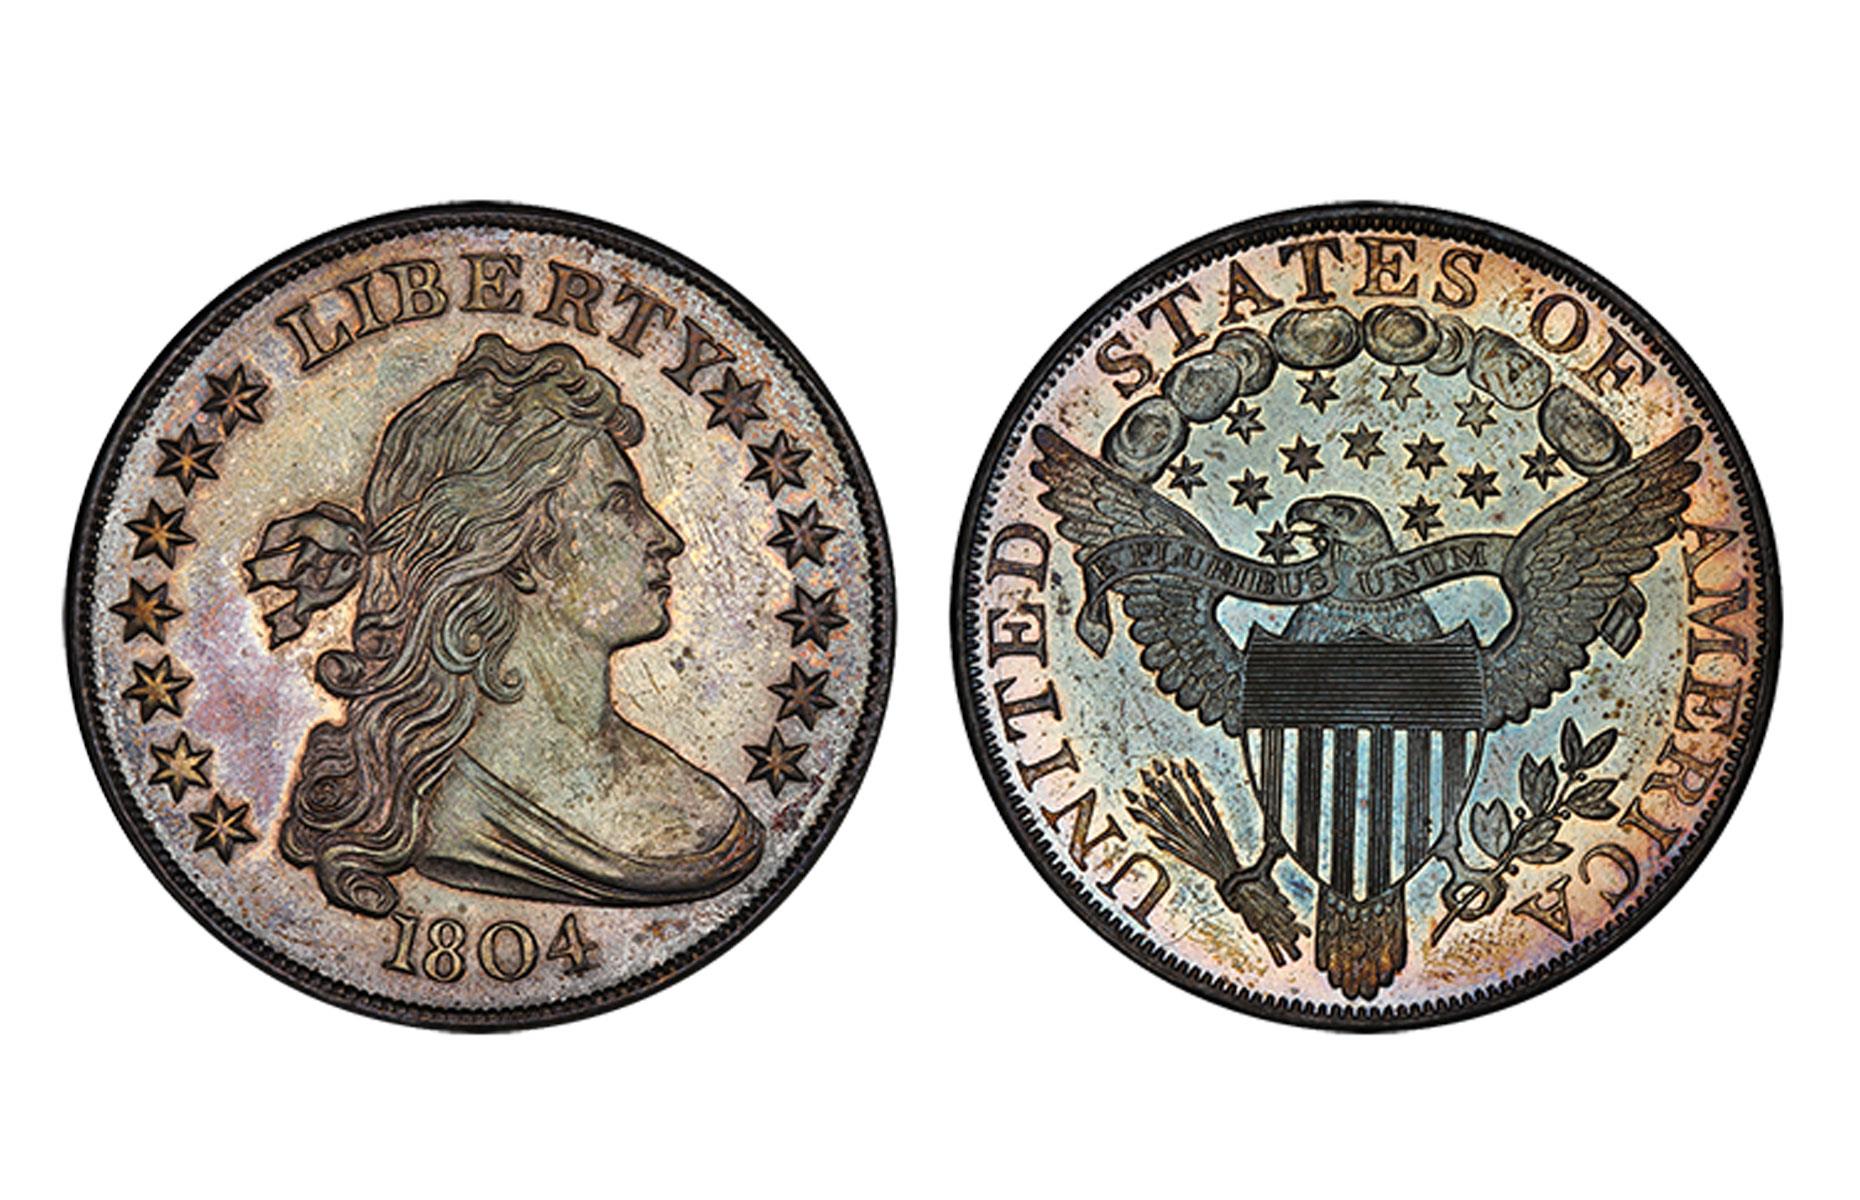 March: the D. Brent Pogue coin collection sells for a record $106.7 million (£81.3m)